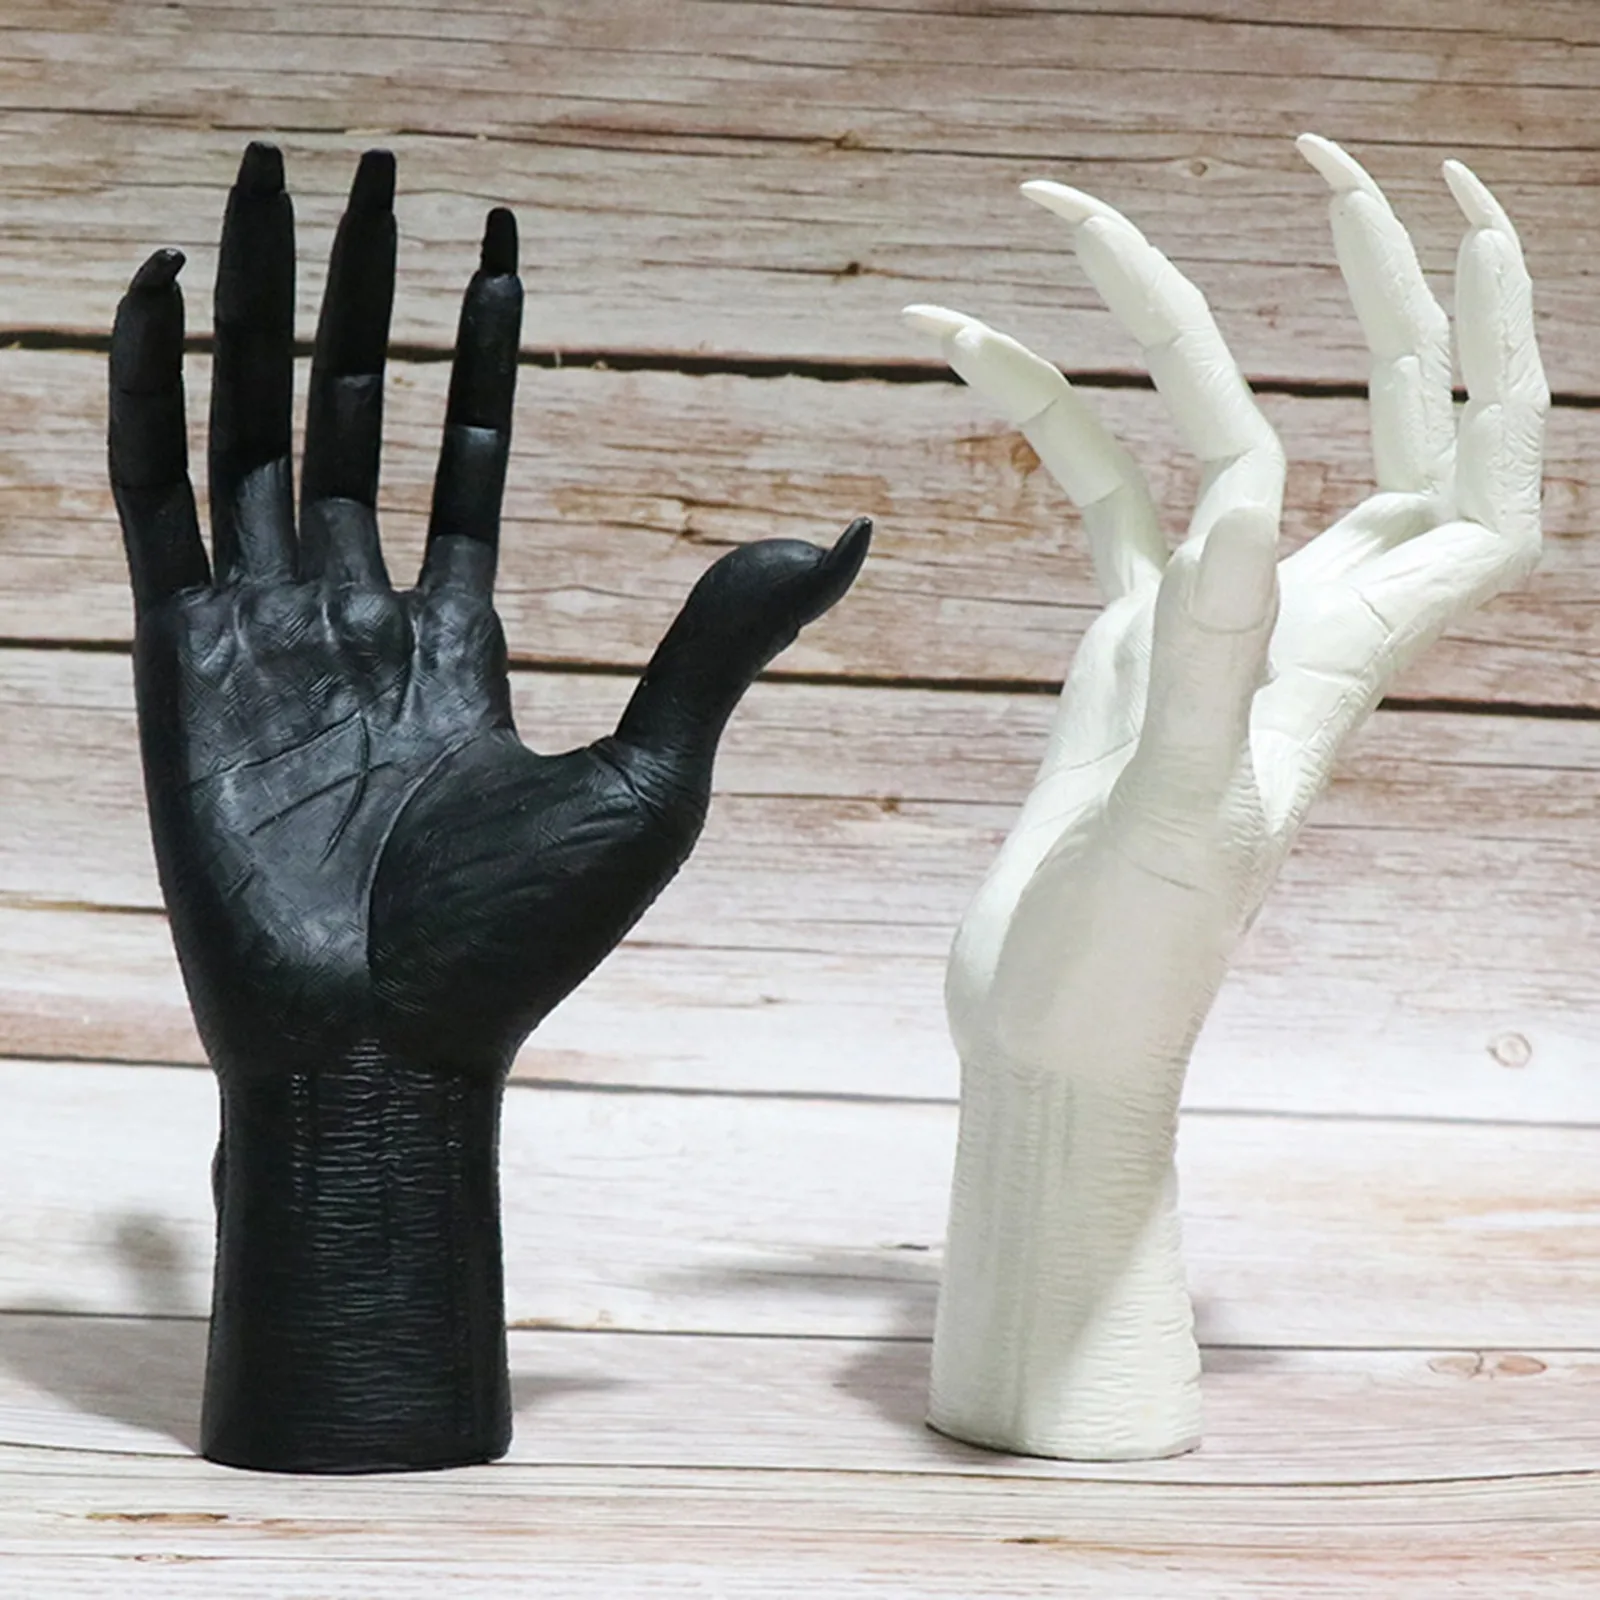 The Witch's Hand Wall Hanging Statues Art Statue Decoration